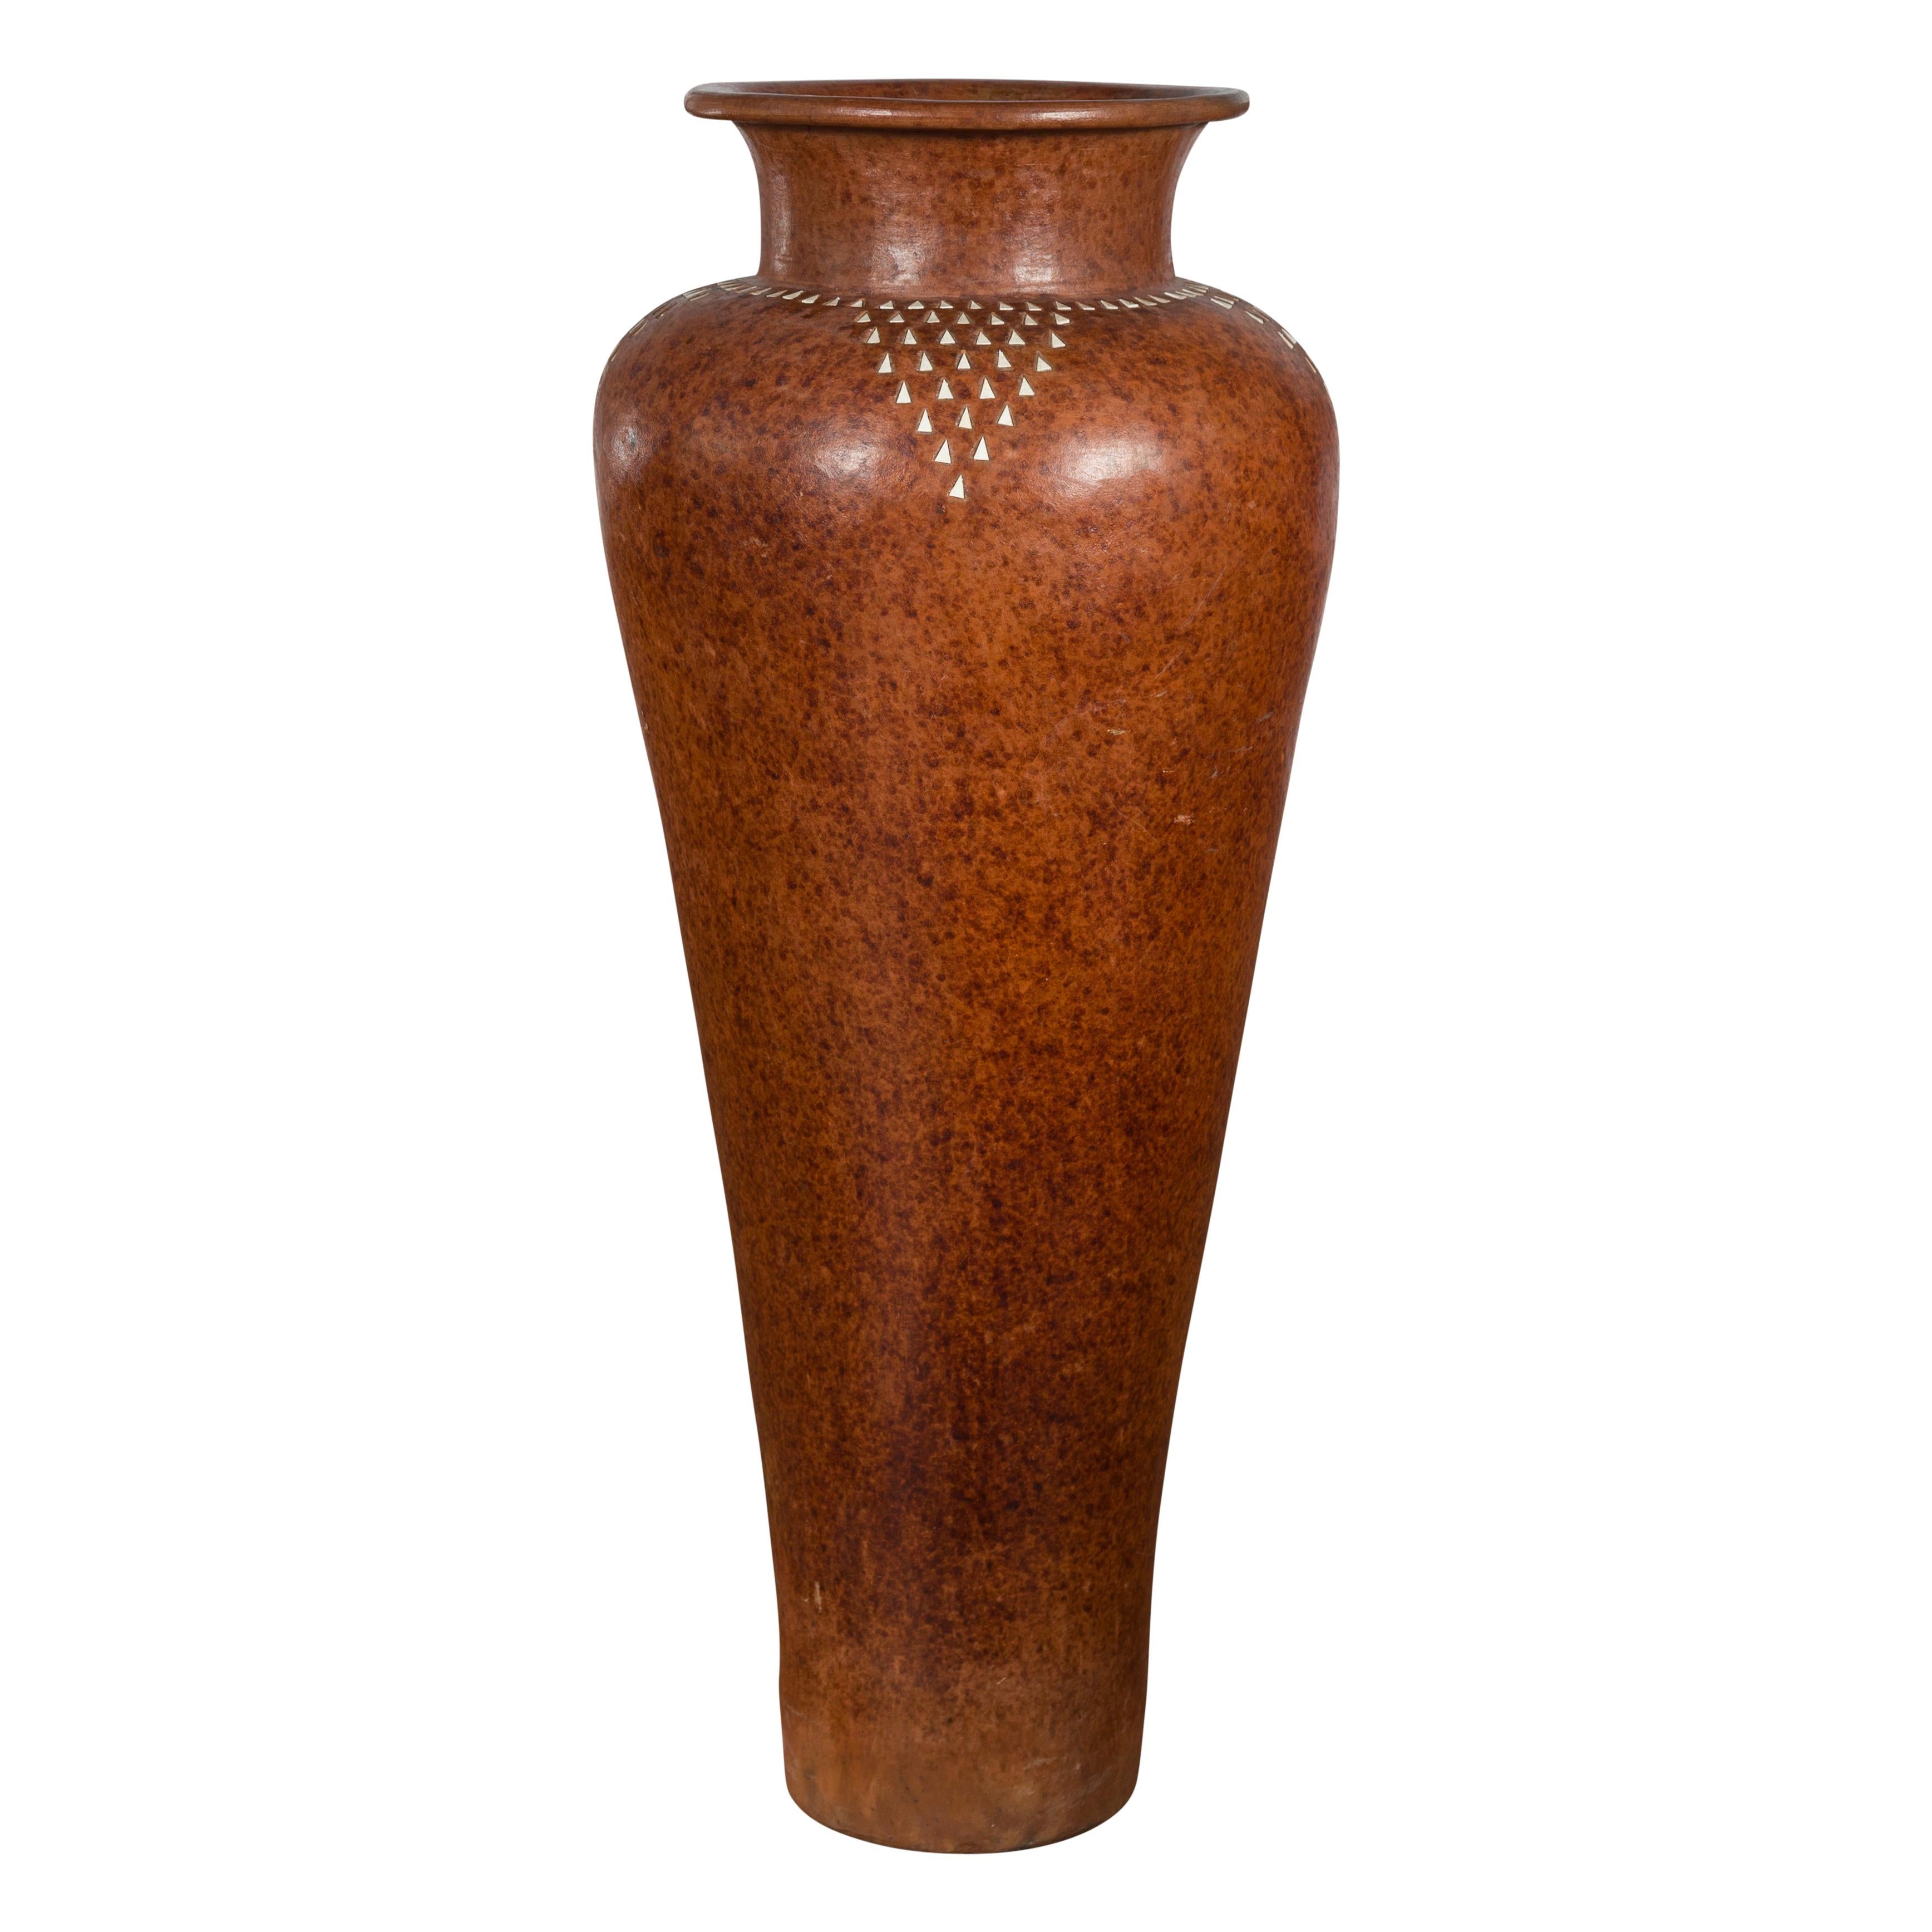 A large vintage Asian handcrafted ceramic vase from the mid 20th century, with slender silhouette and white triangular inlaid motifs. Created in Asia during the midcentury period, this vintage vase attracts the attention with its tall proportions,